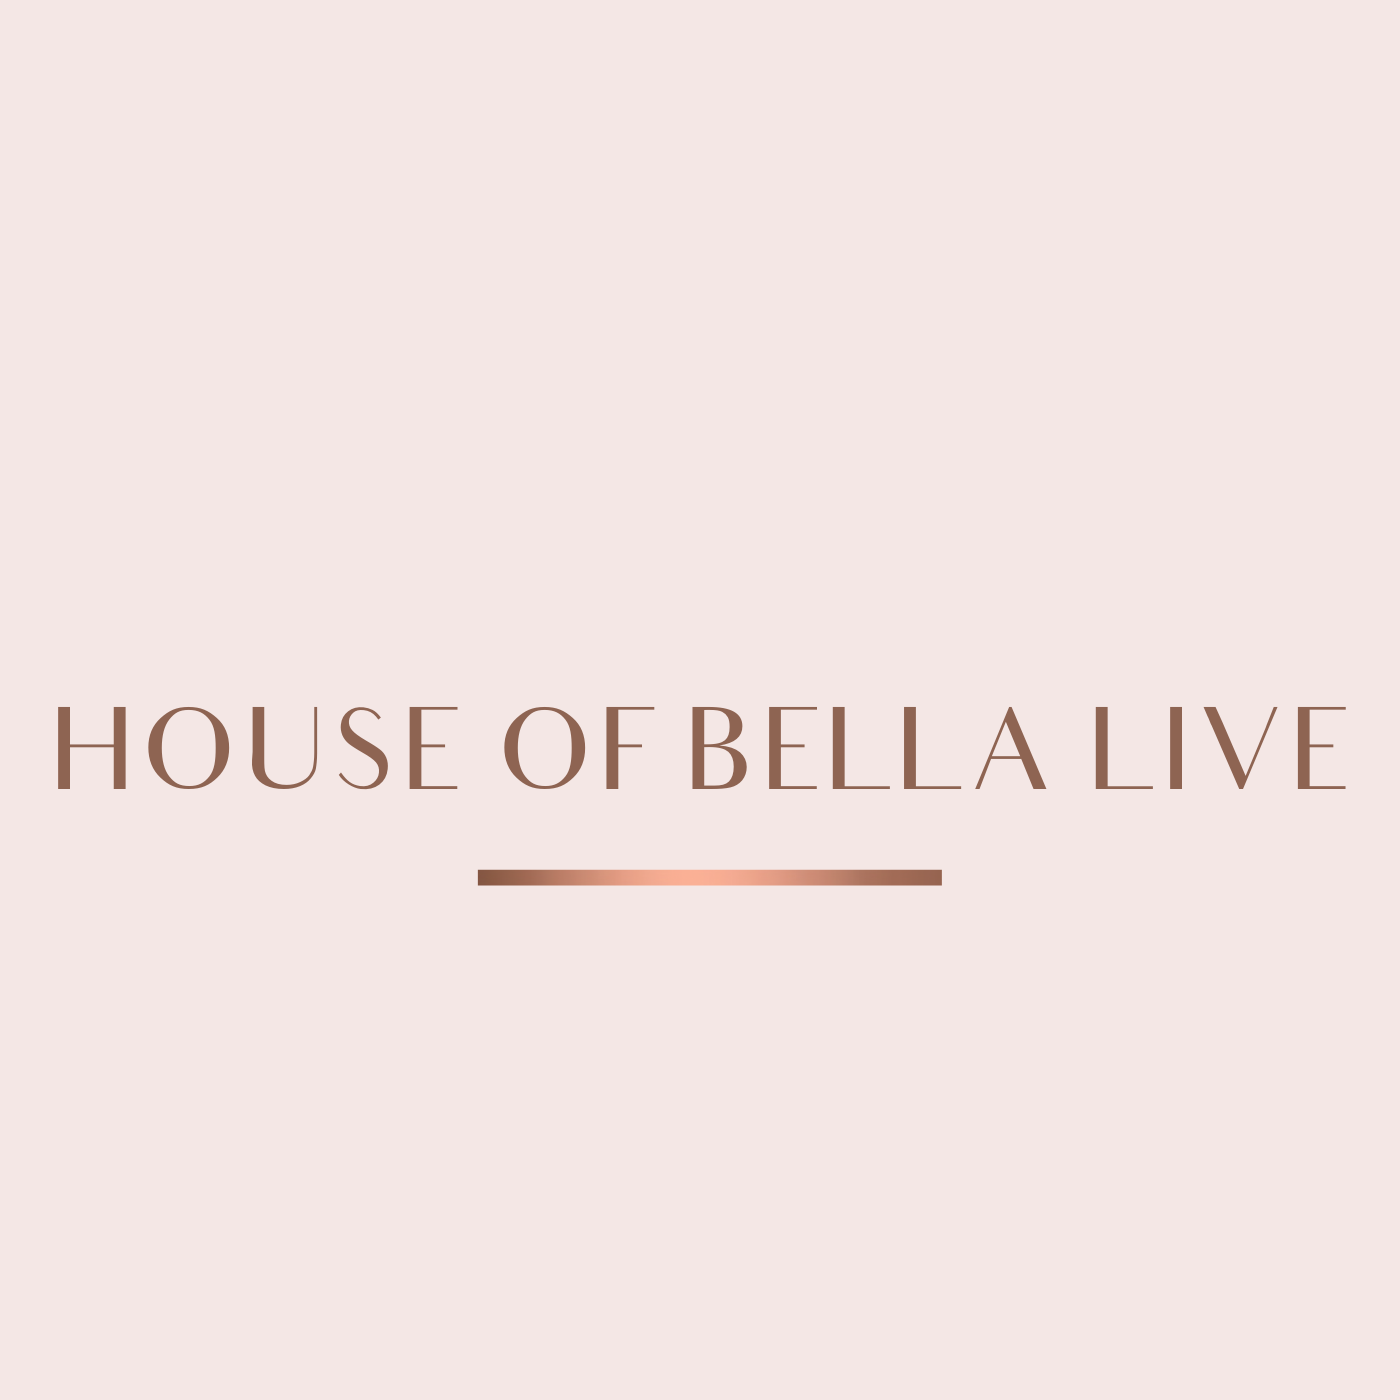 HOUSE OF BELLA LIVE